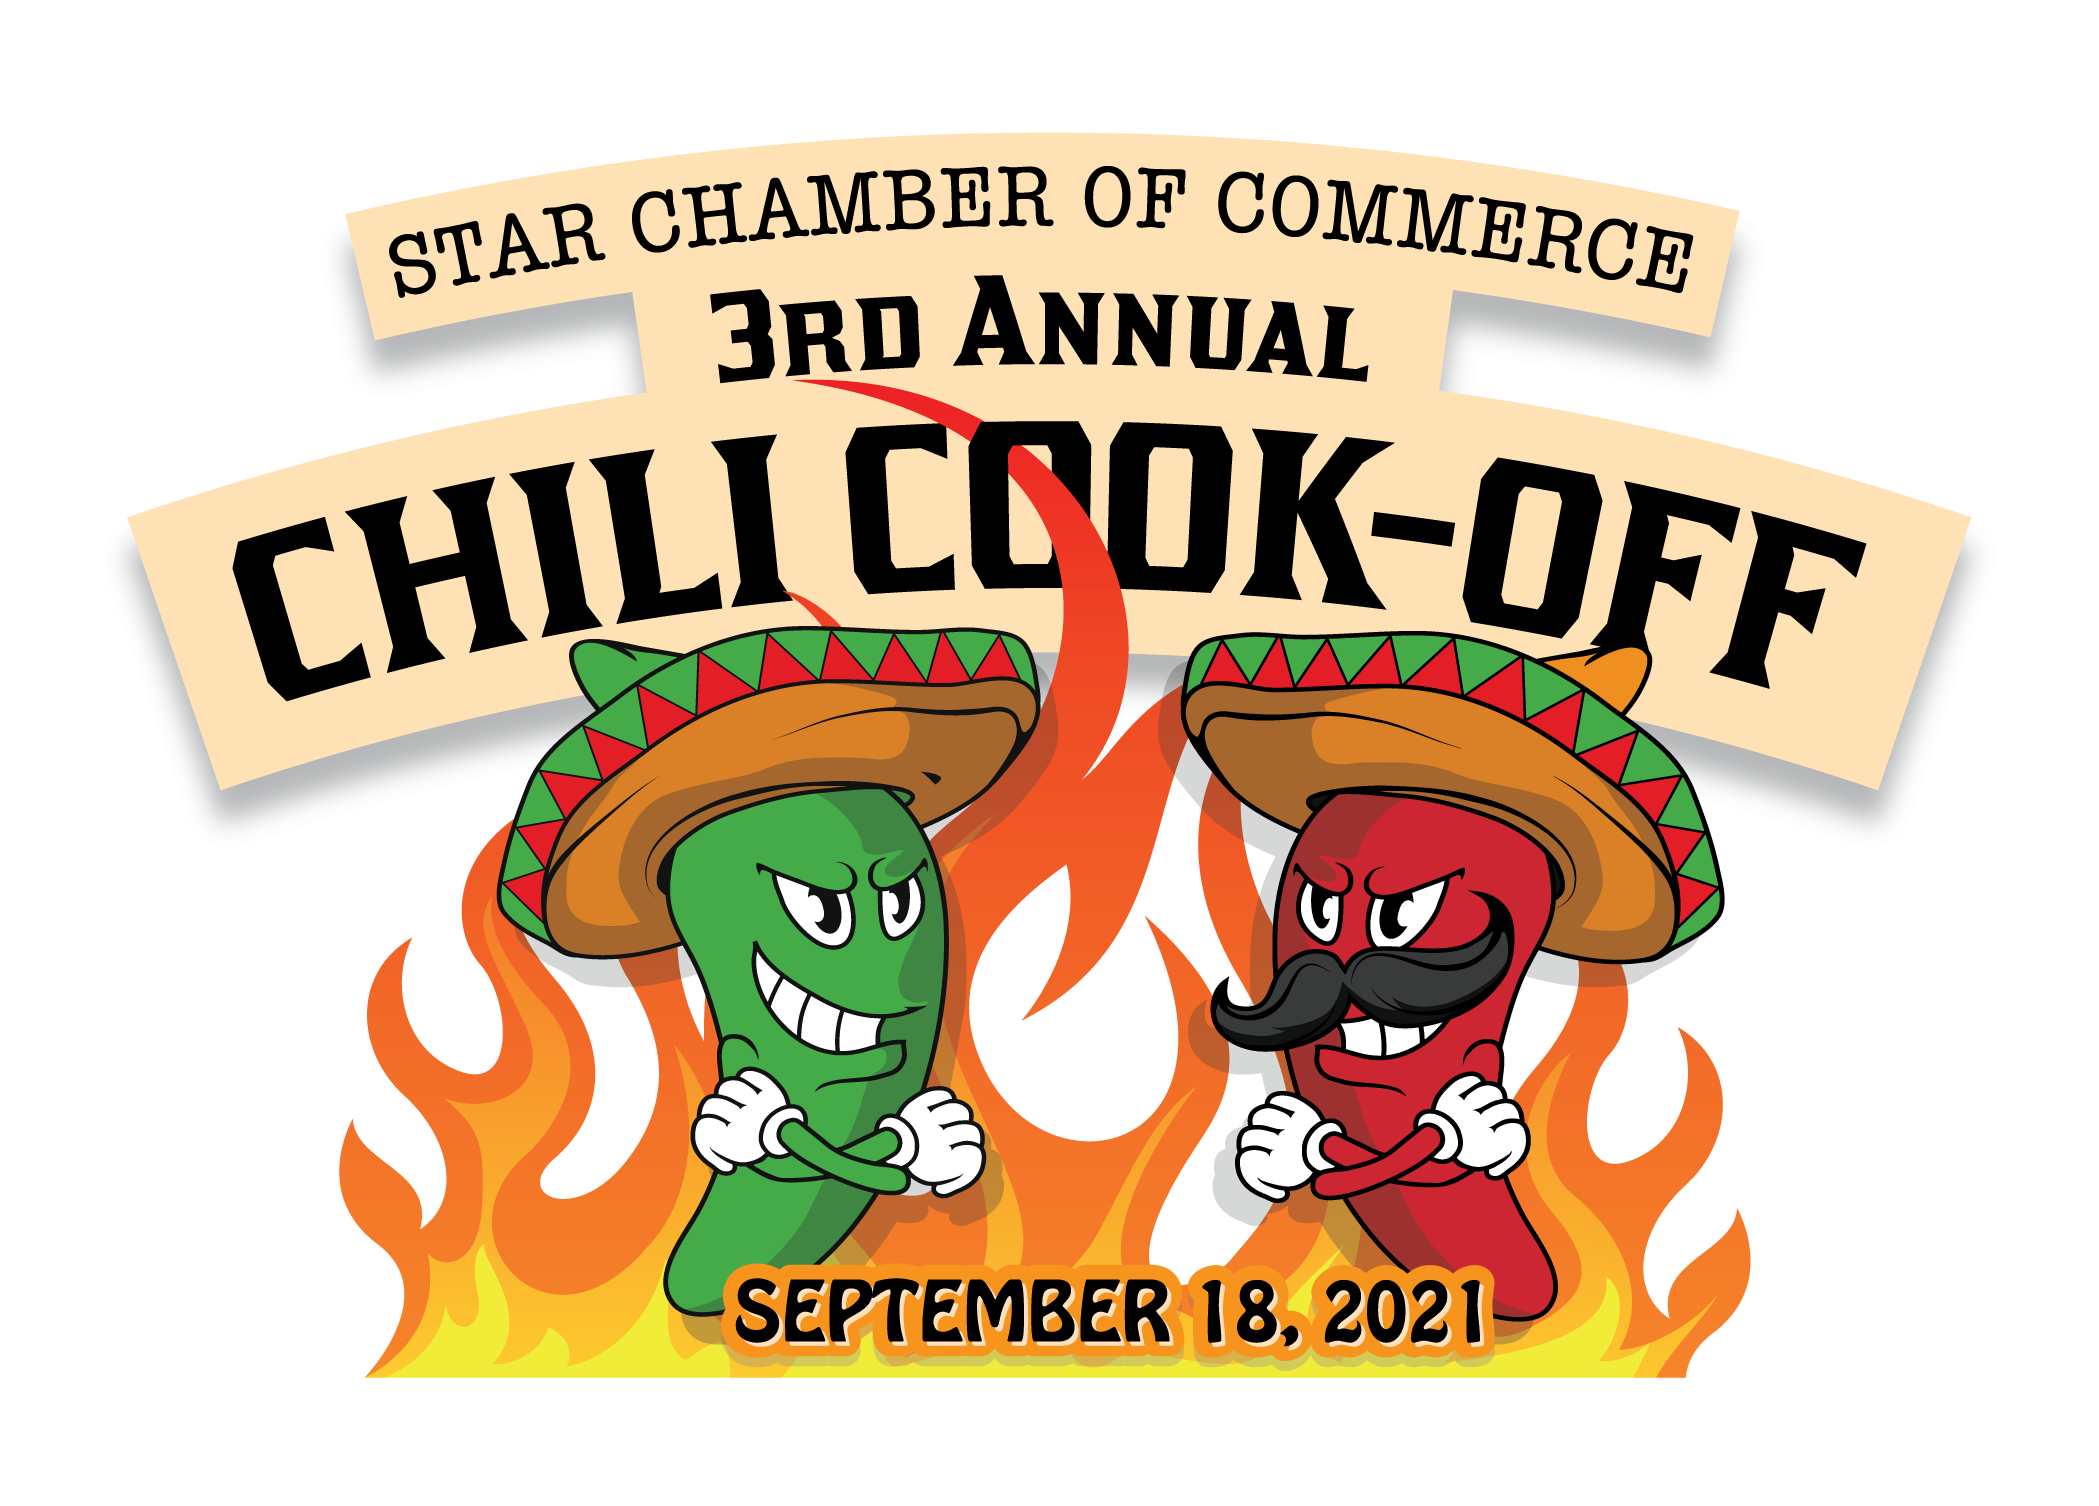 Star Chamber of Commerce Chili Cook-Off